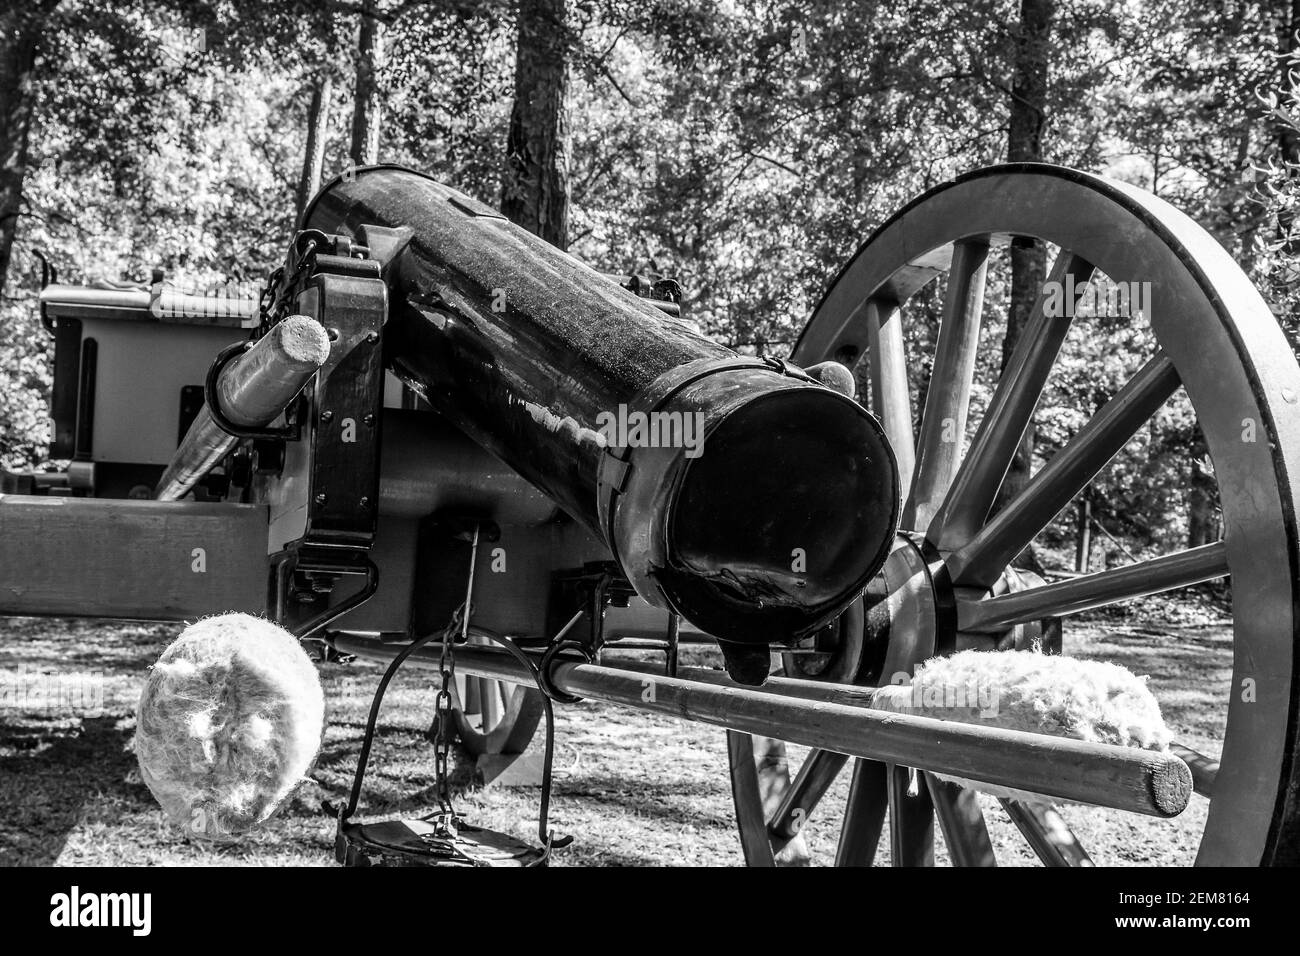 Close up of an American Civil War era cannon in black and white. Stock Photo